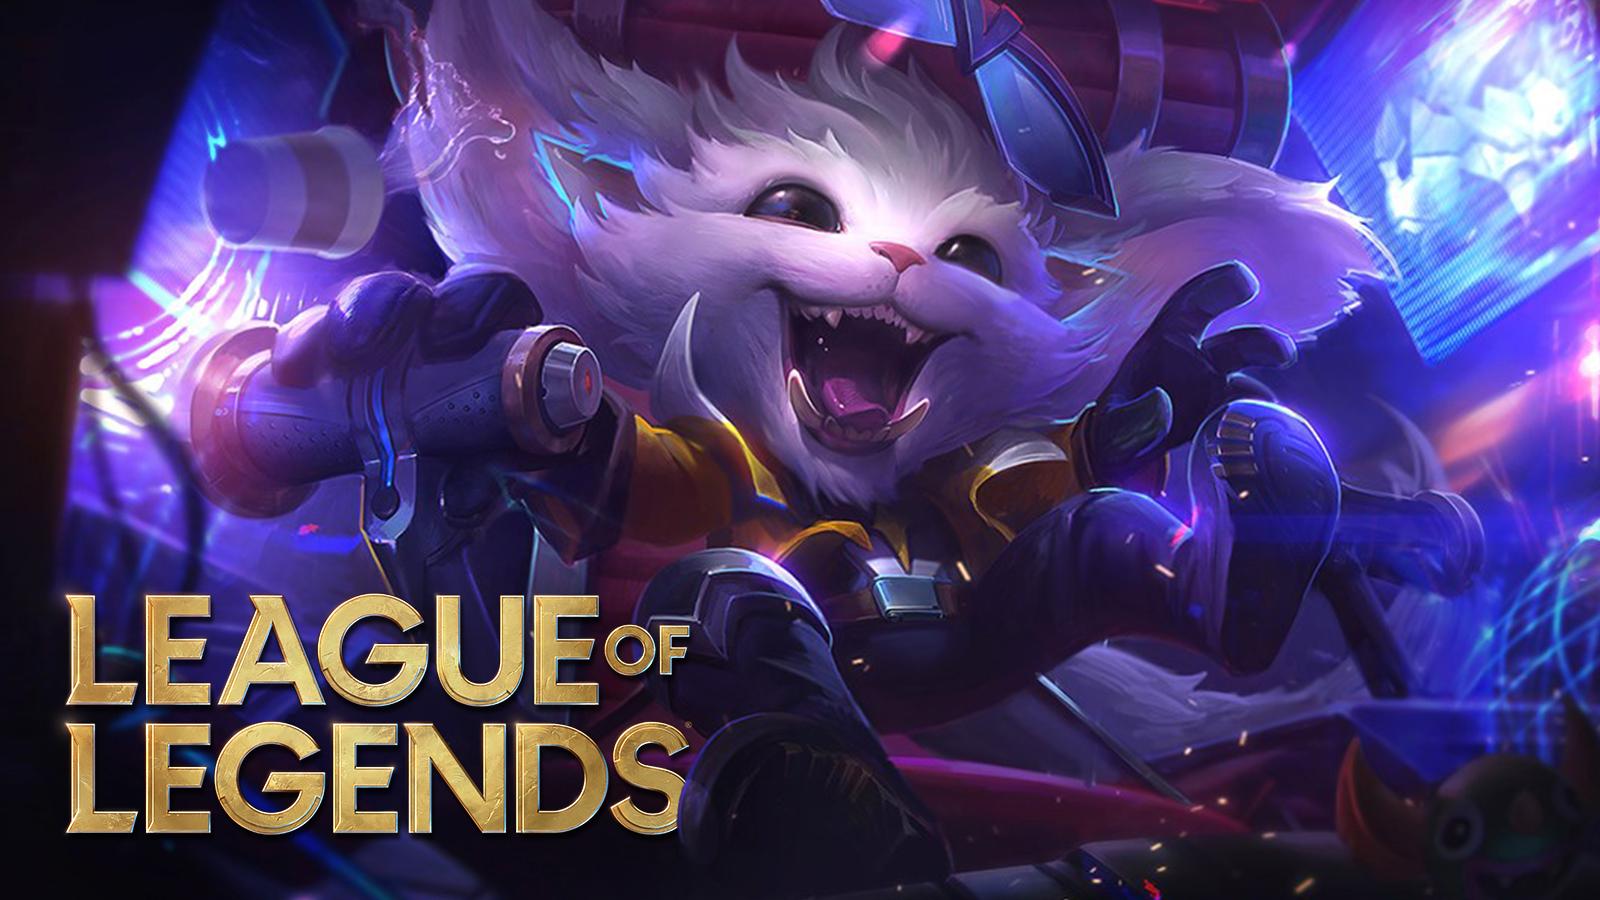 Super Galaxy Gnar yelling above League of Legends patch 11.1.